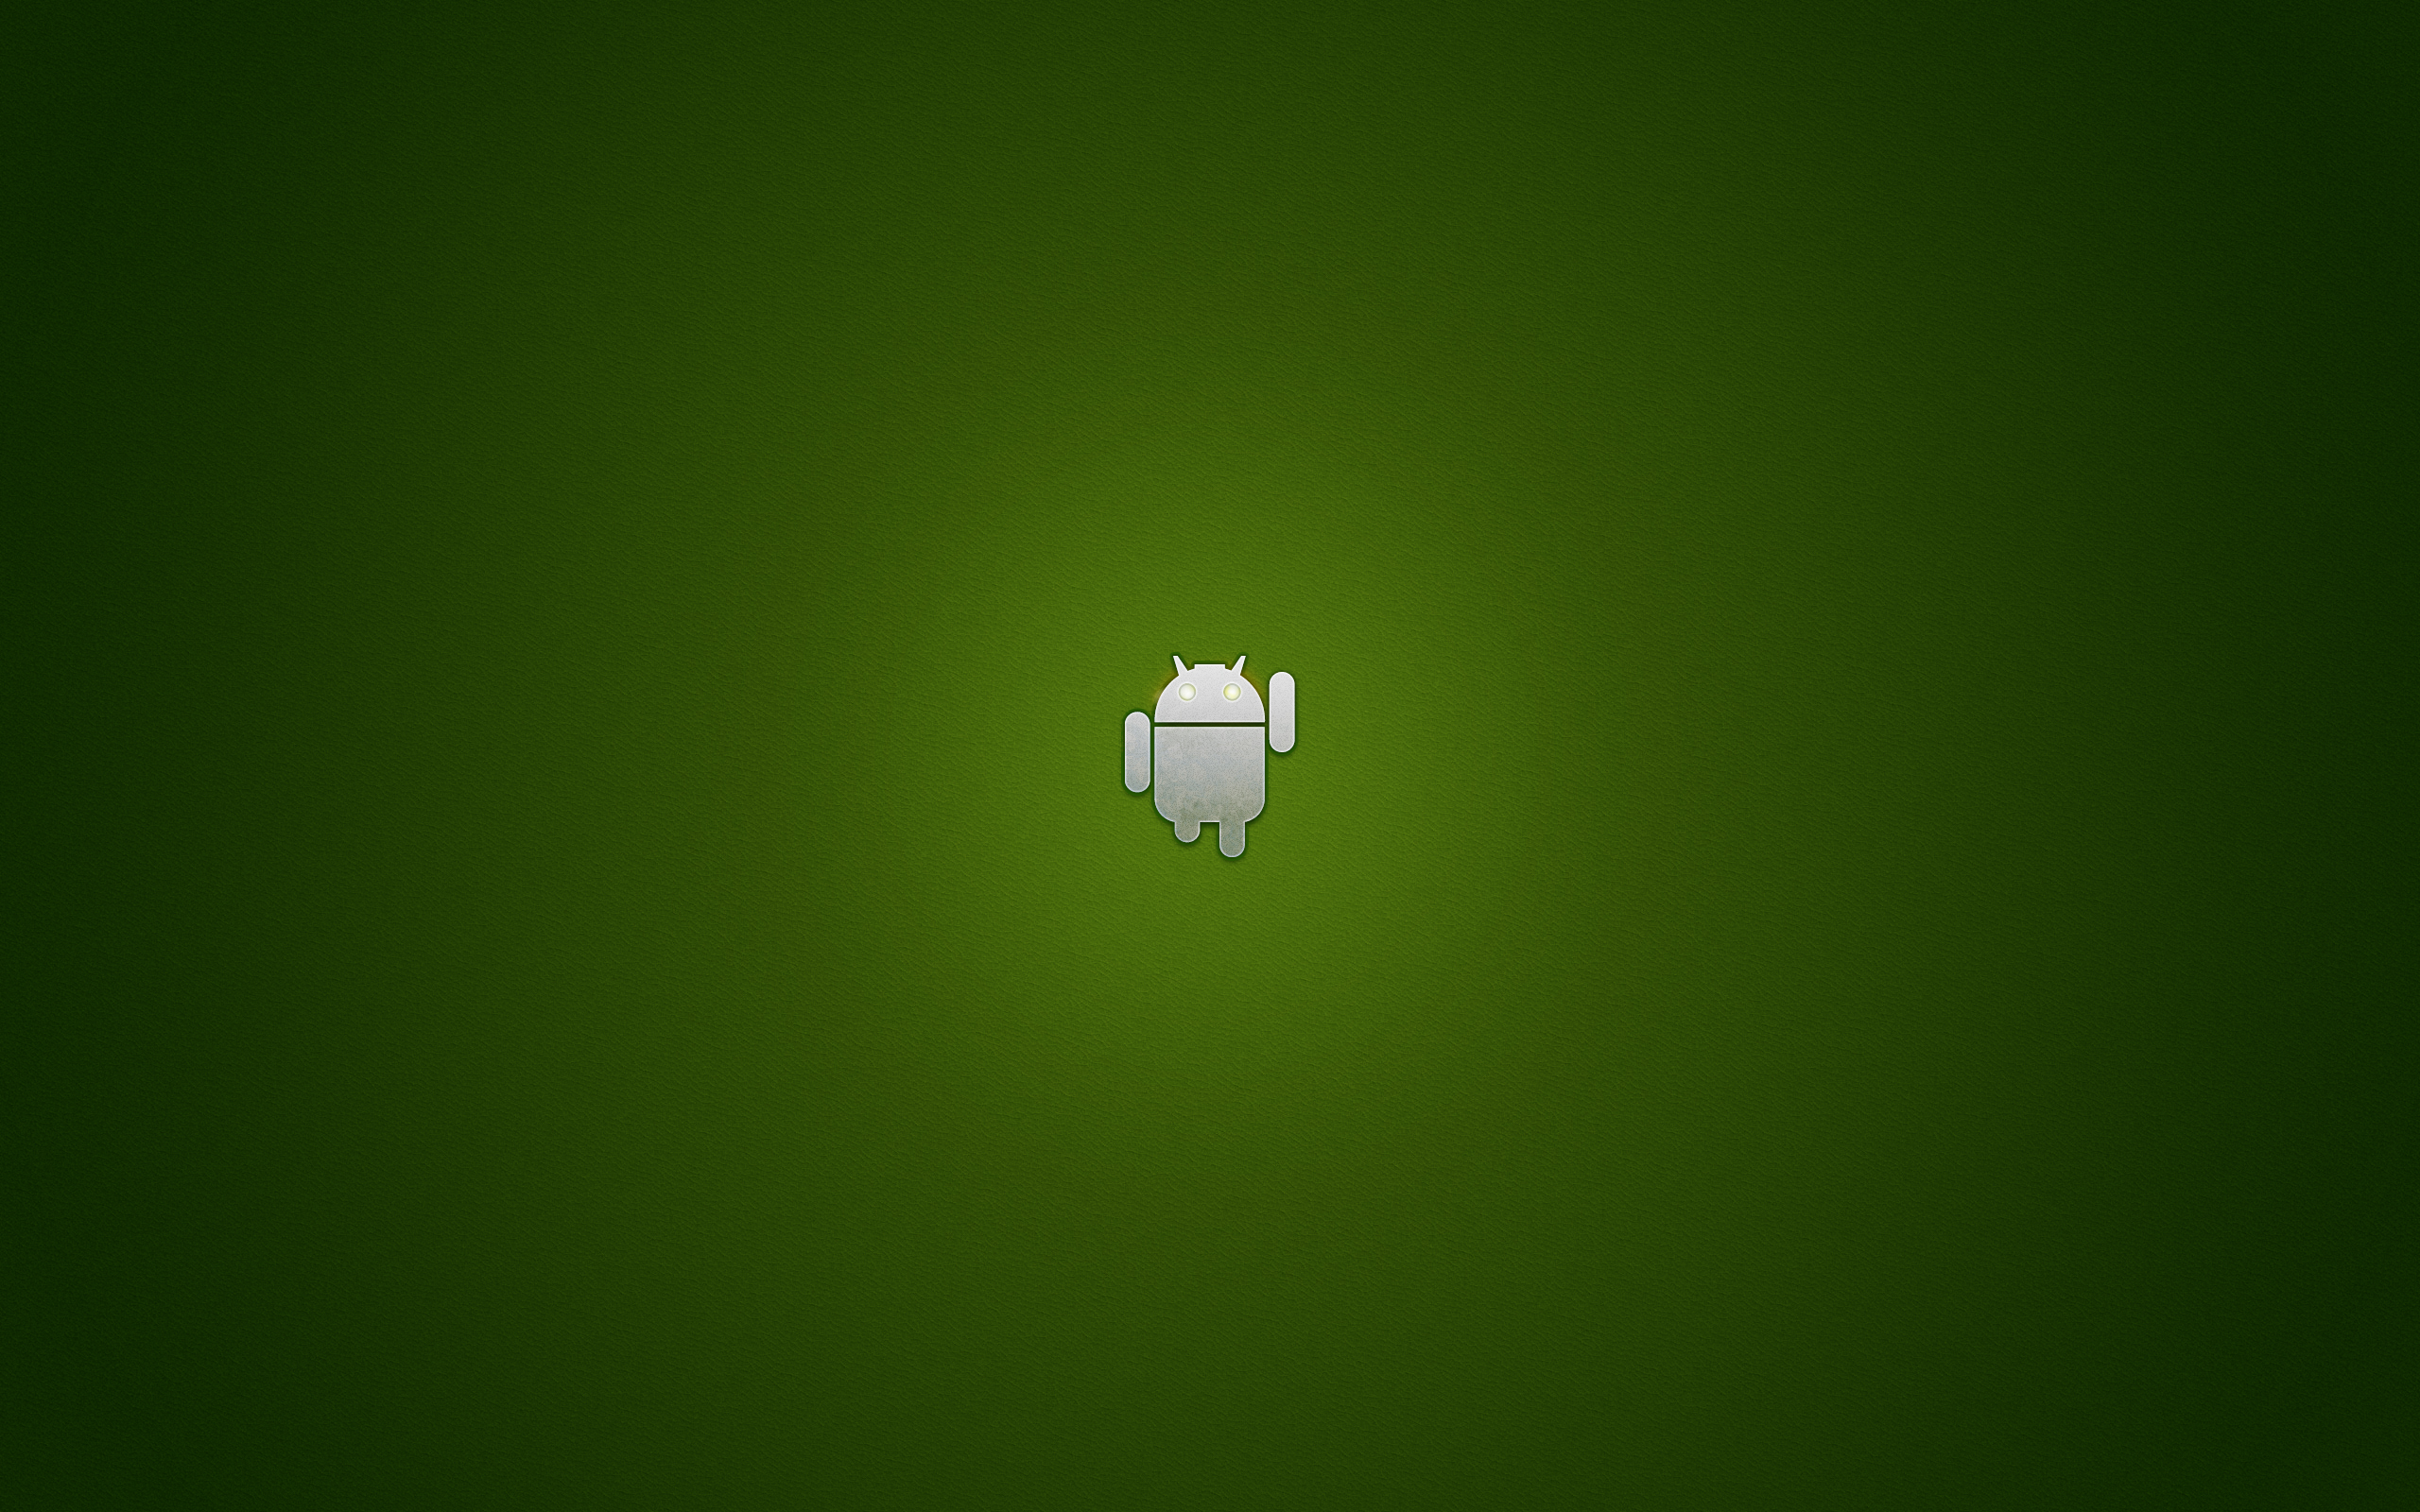 android, technology